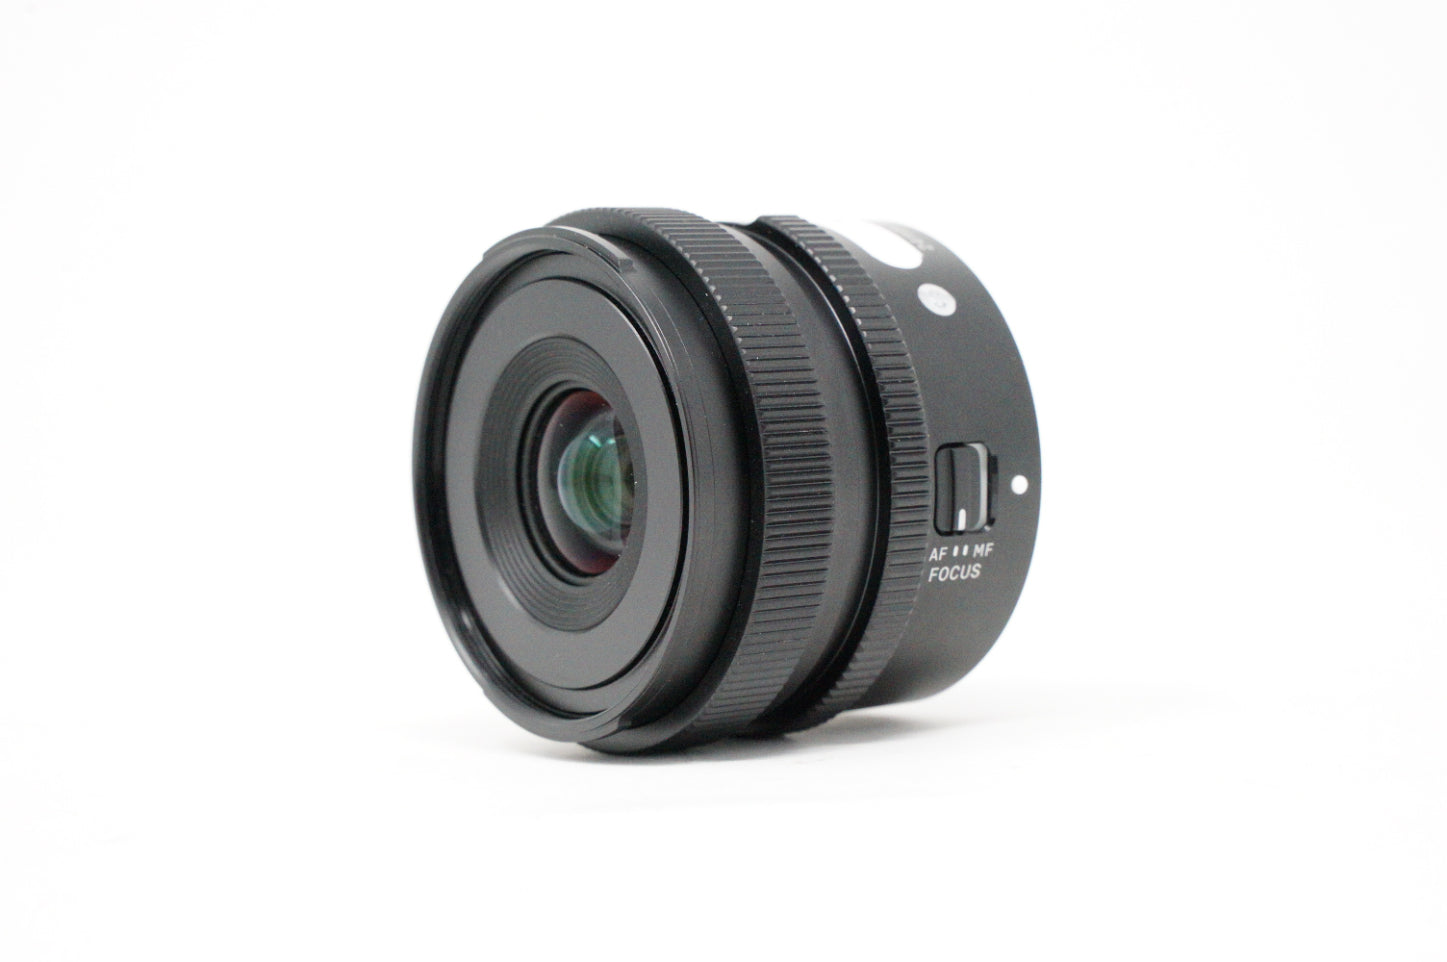 Used Sigma 24mm F3.5 DG DN lens in Sony E-Mount